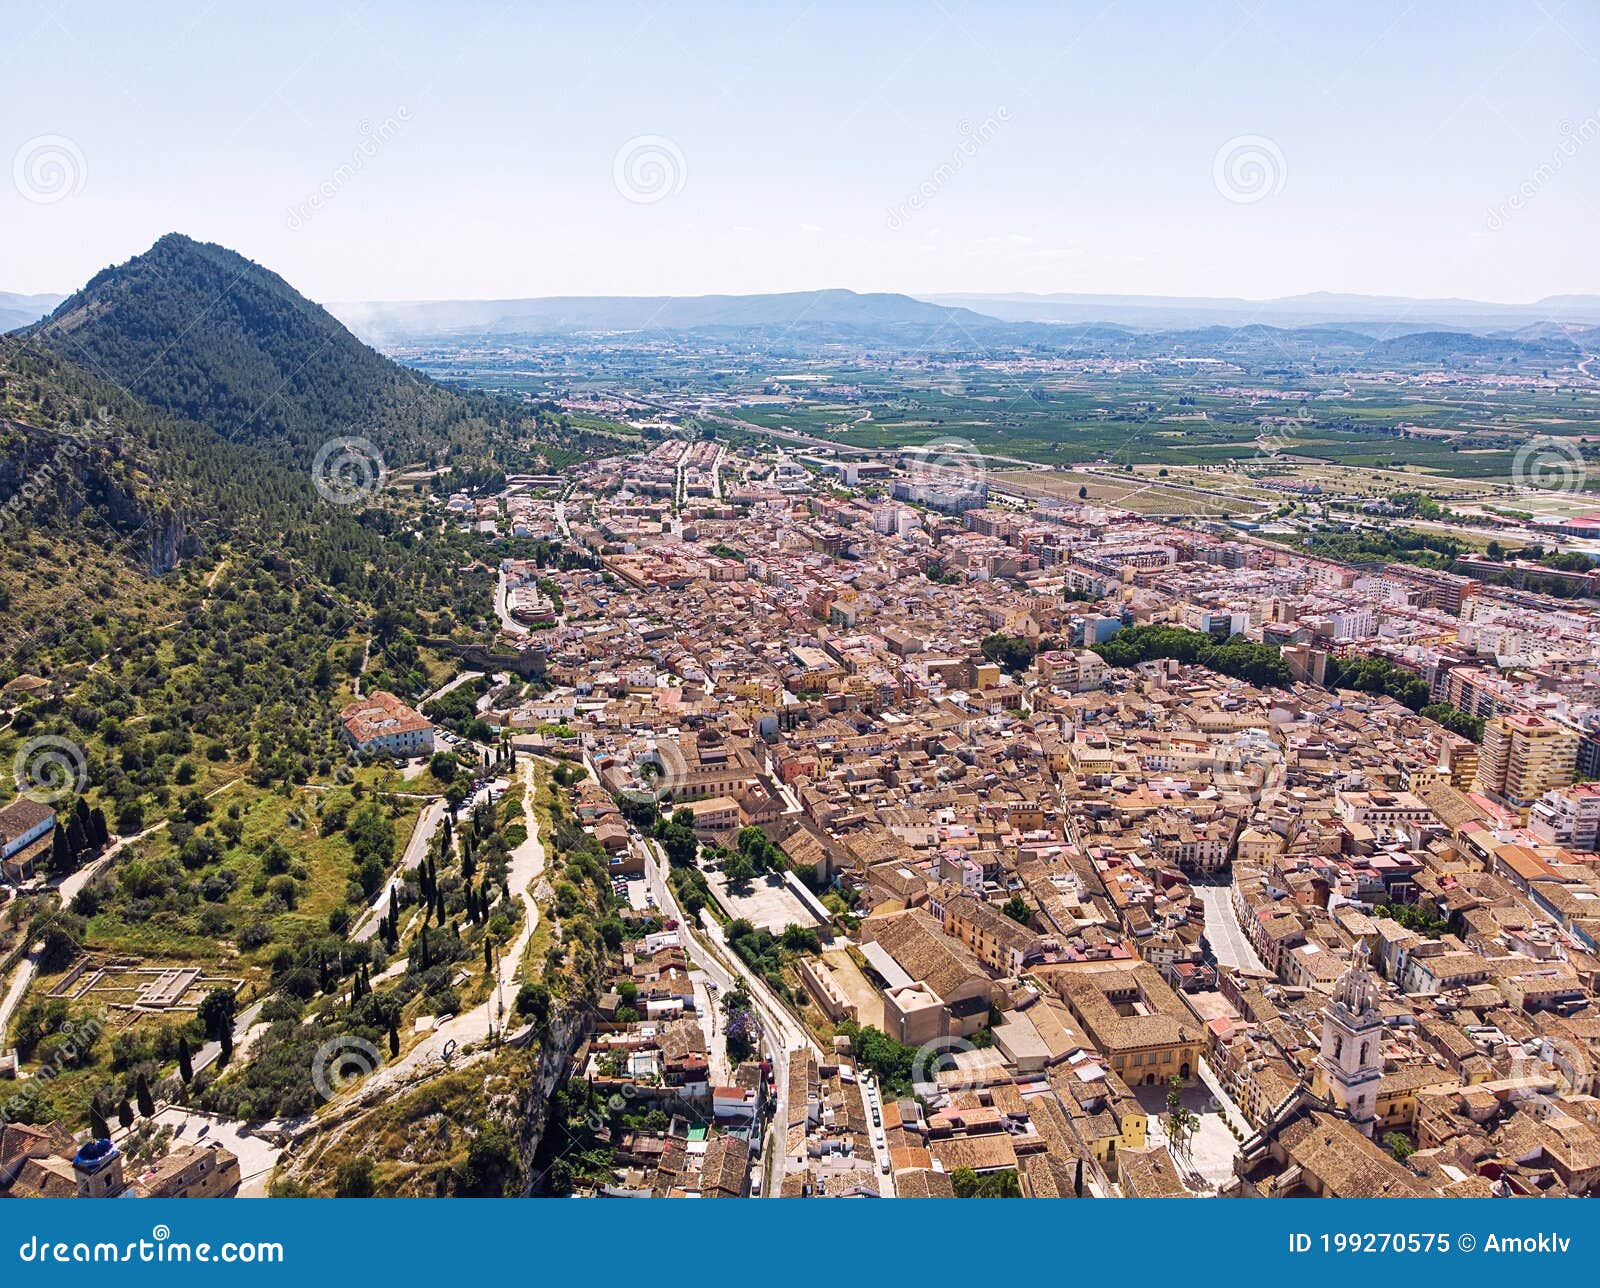 aerial photography xativa townscape. spain